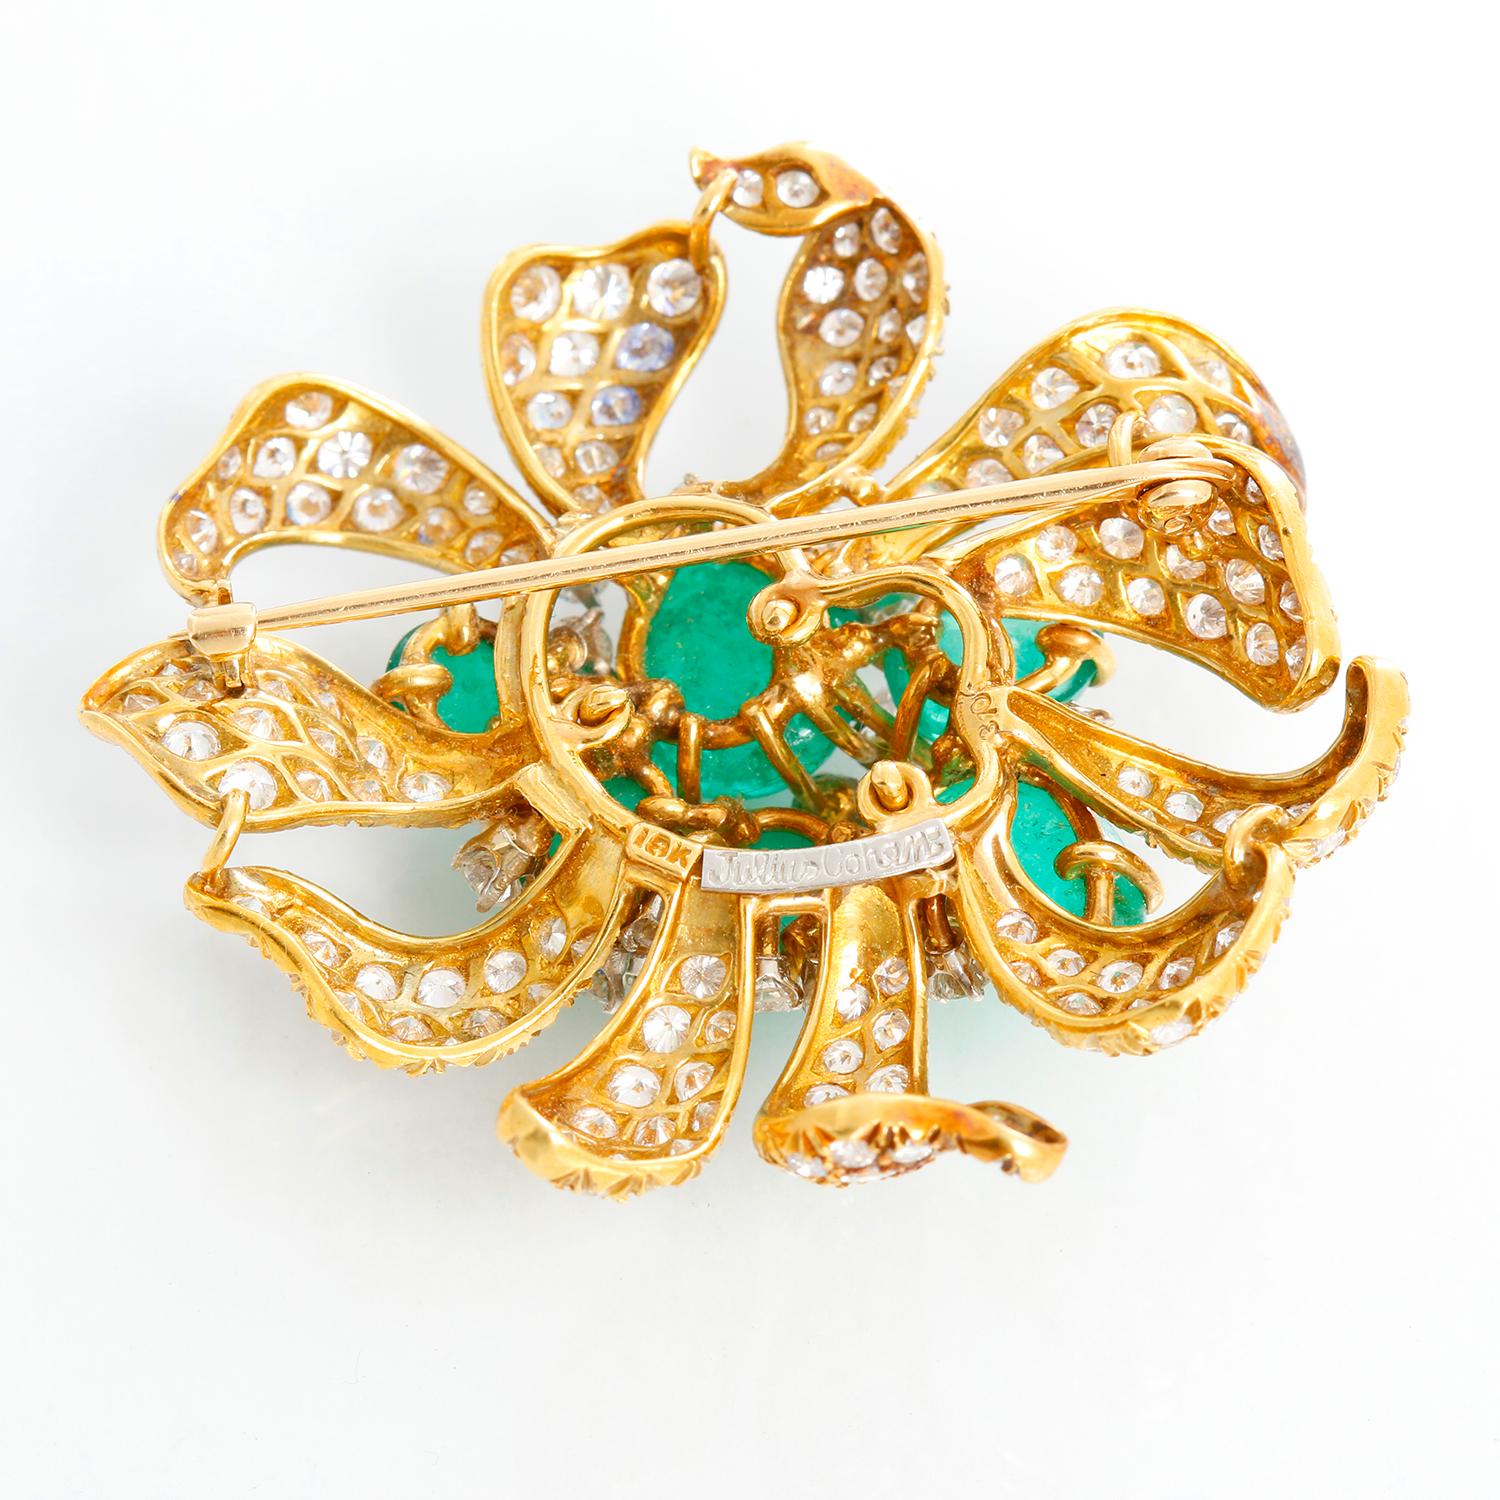 Julius Cohen Emerald and Diamond Estate Pin - 18K yellow gold flower pin, weighing 5 carats of diamonds and 5 carats of cabochon emeralds in pear and oval shapes. Measures 1 3/4 inch at its widest. 

Signed by Julius Cohen who worked for Oscar